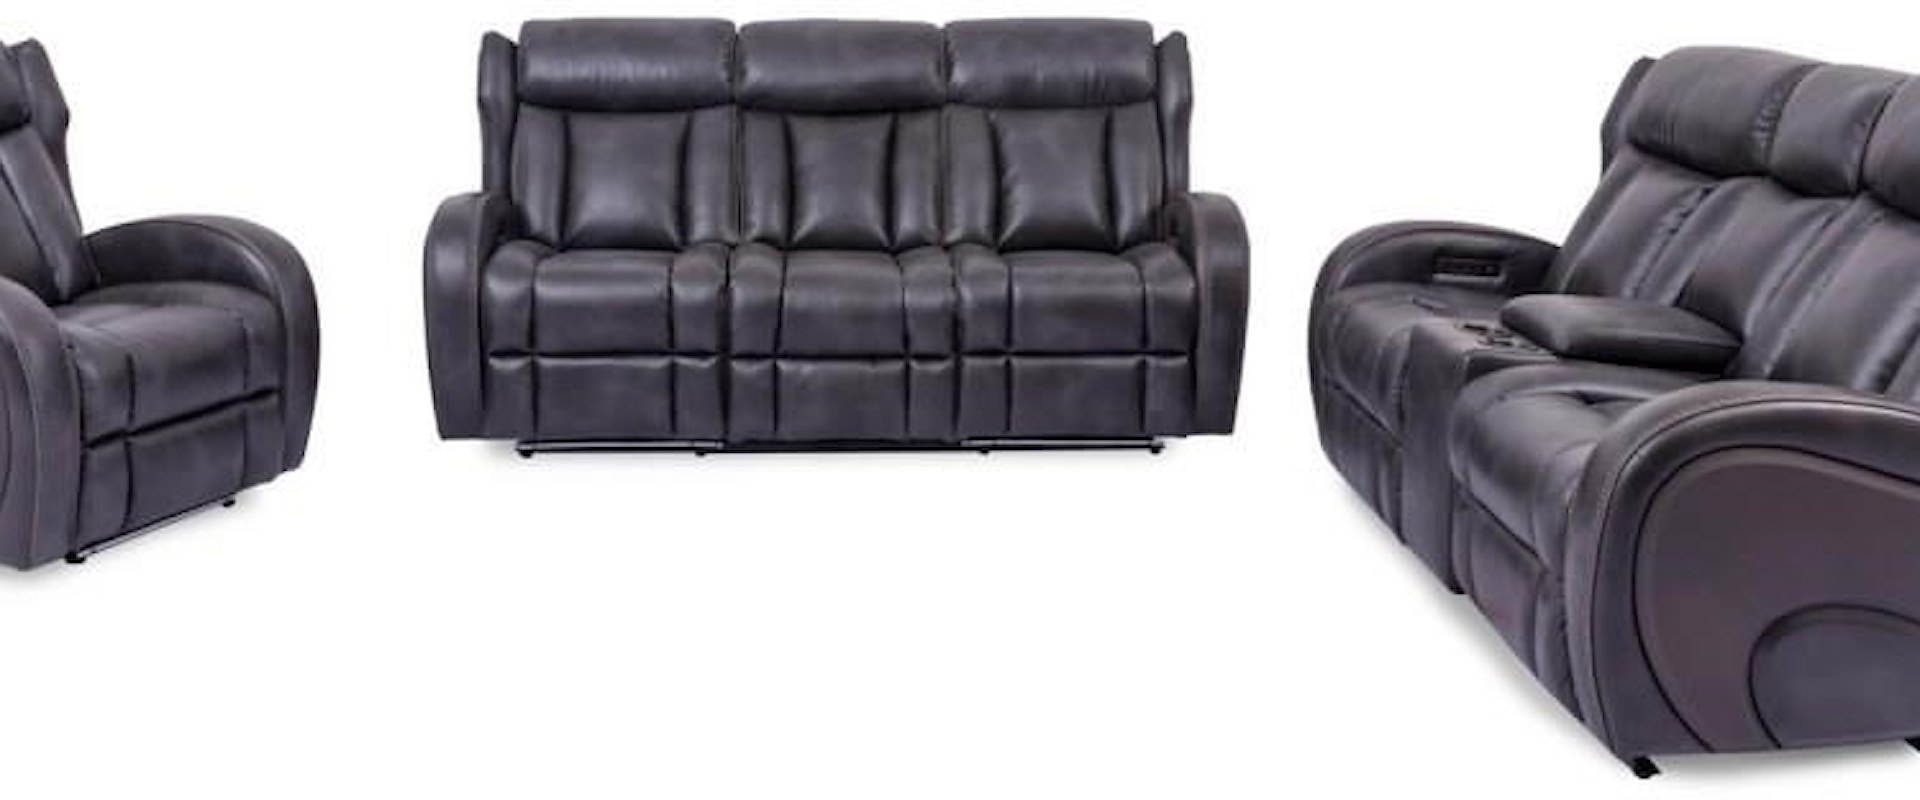 Power Headrest Sofa with Dropdown Table and Lights, Power Reclining Loveseat with Console and Lights and Power Recliner with Lights